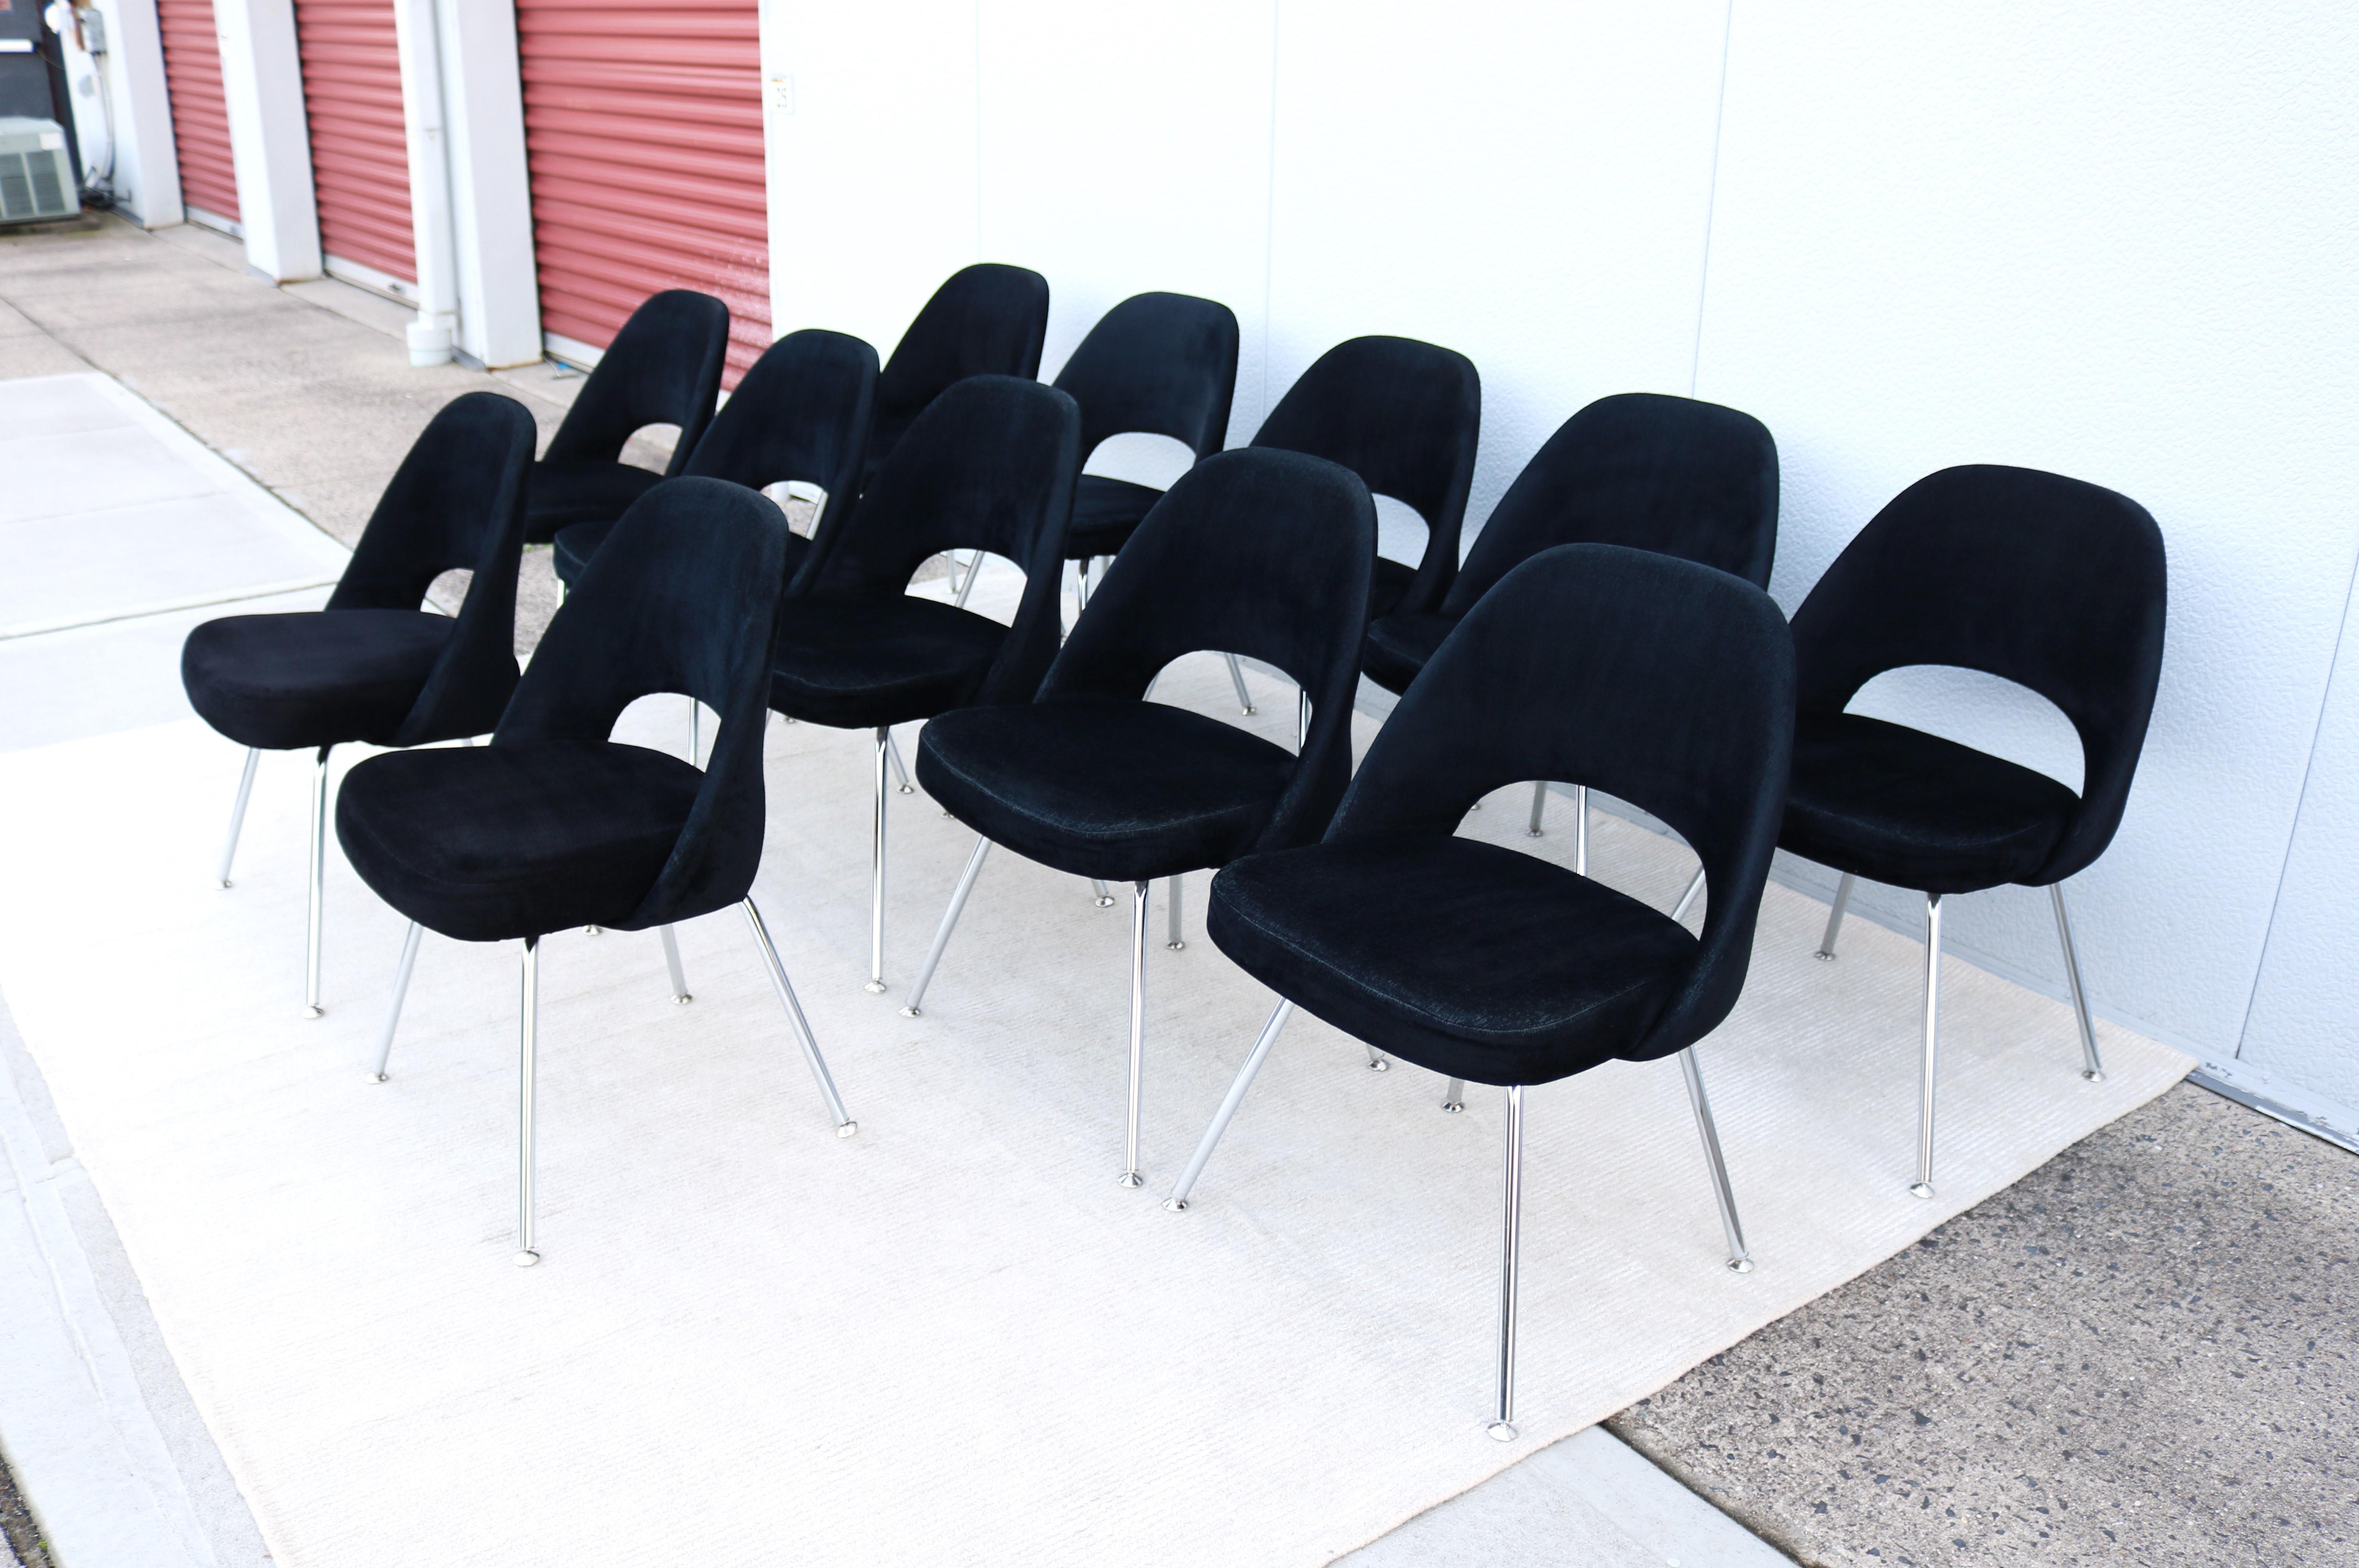 Stunning authentic mid-century modern set of twelve Saarinen executive armless chairs by Knoll.
One of Knoll's most popular designs that achieved supreme comfort through the shape of its shell.
It was introduced in 1950 a midcentury modern classic